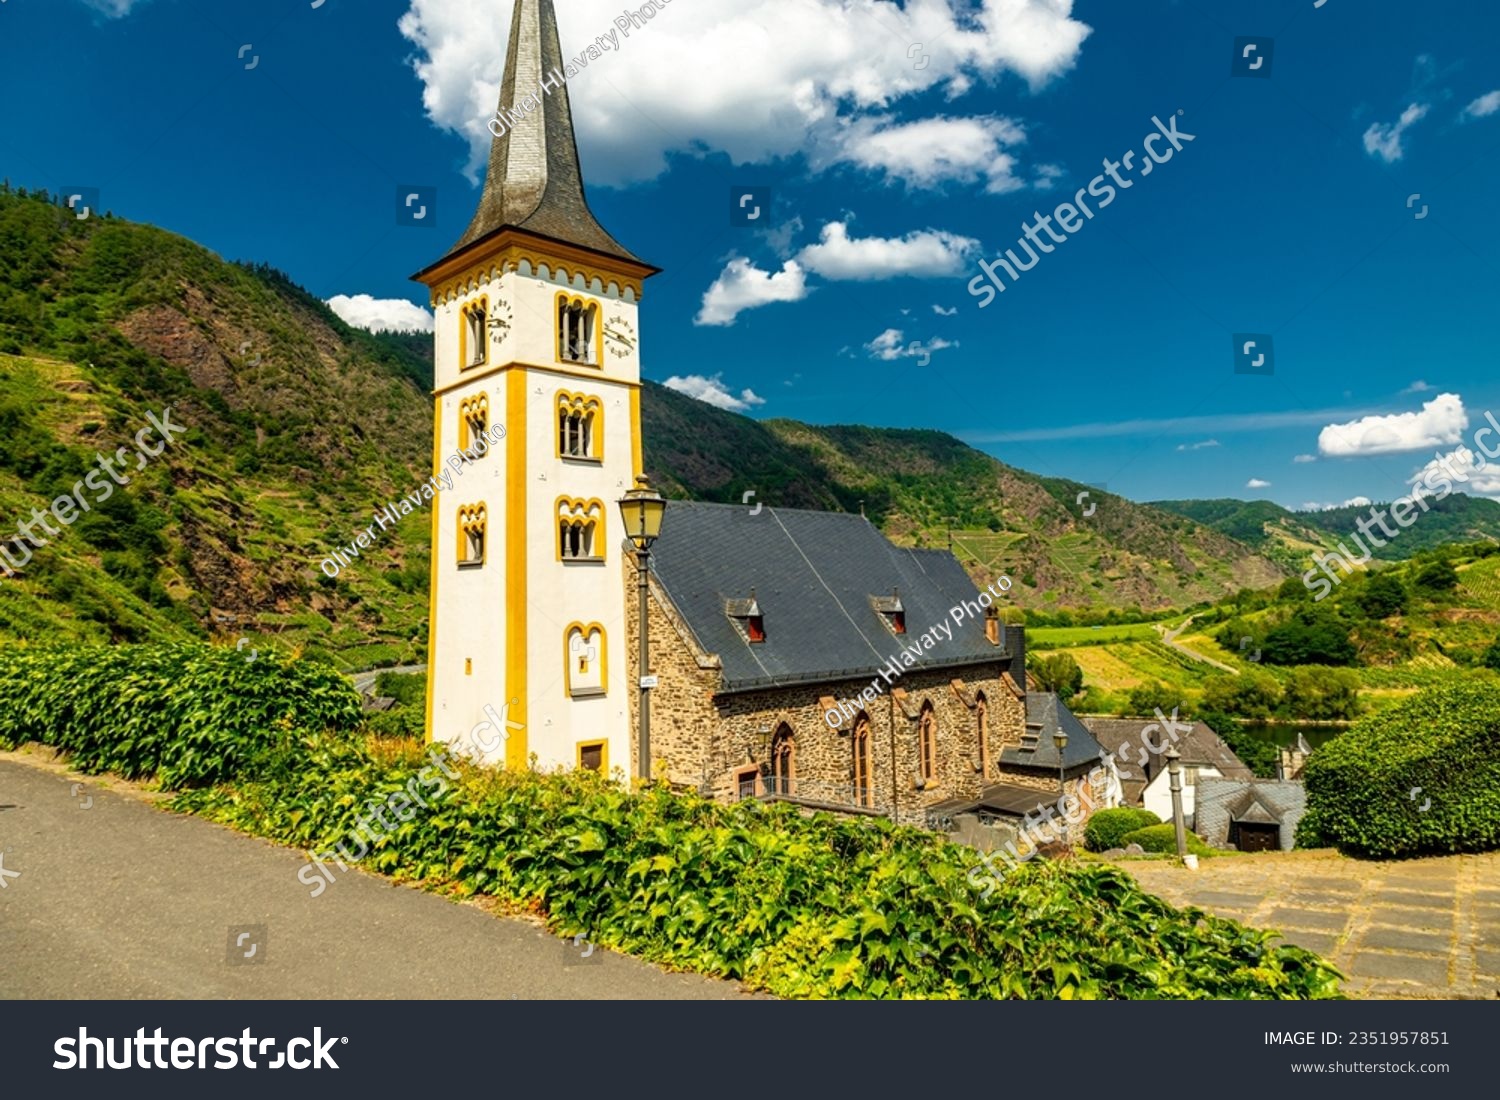 Short discovery tour in the Moselle region near Bremm - Rhineland-Palatinate - Germany #2351957851